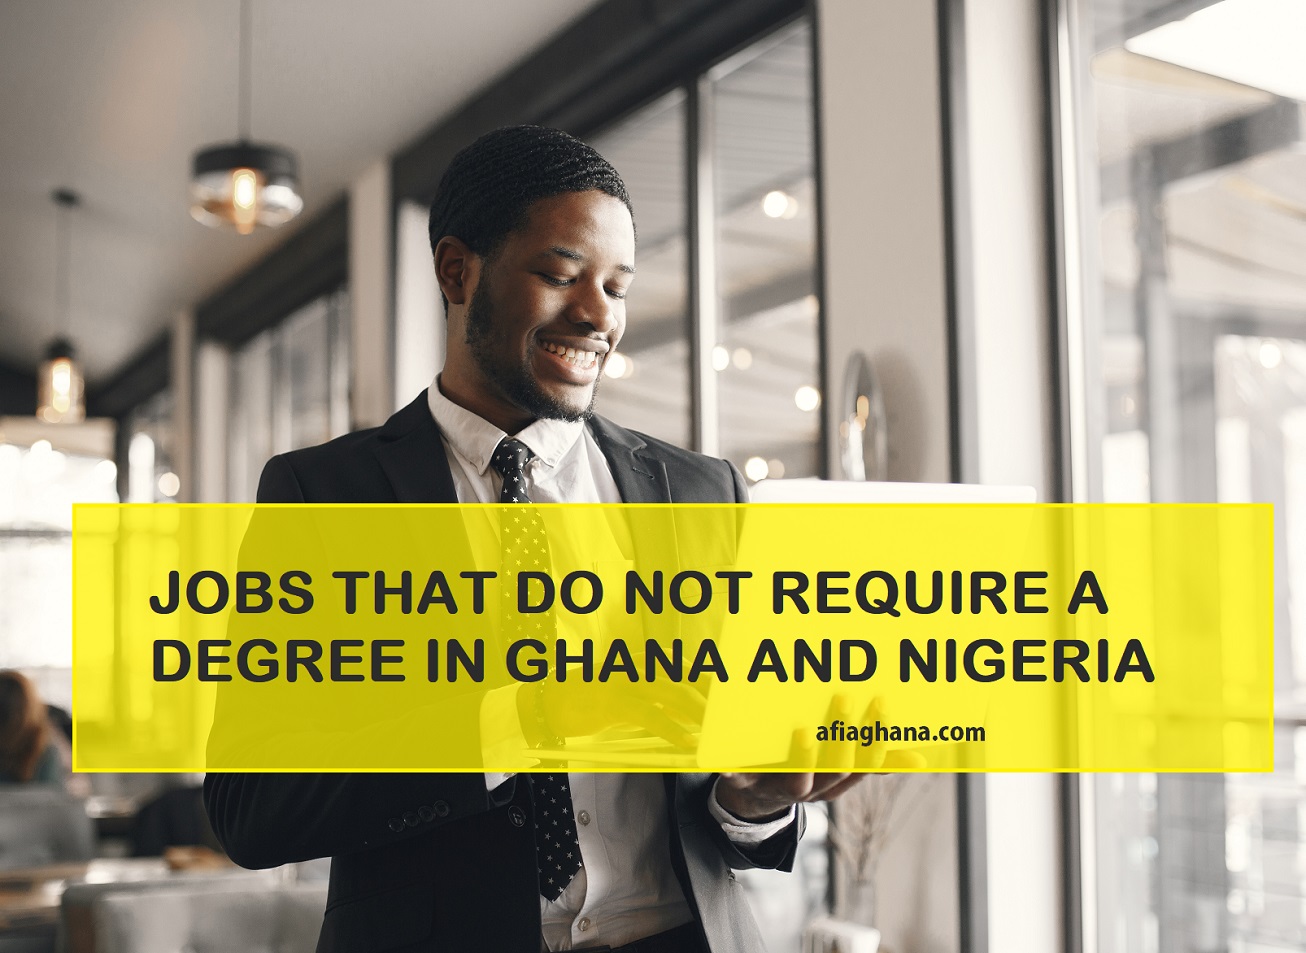 10 Jobs That Don't Require a Degree in Ghana and Nigeria